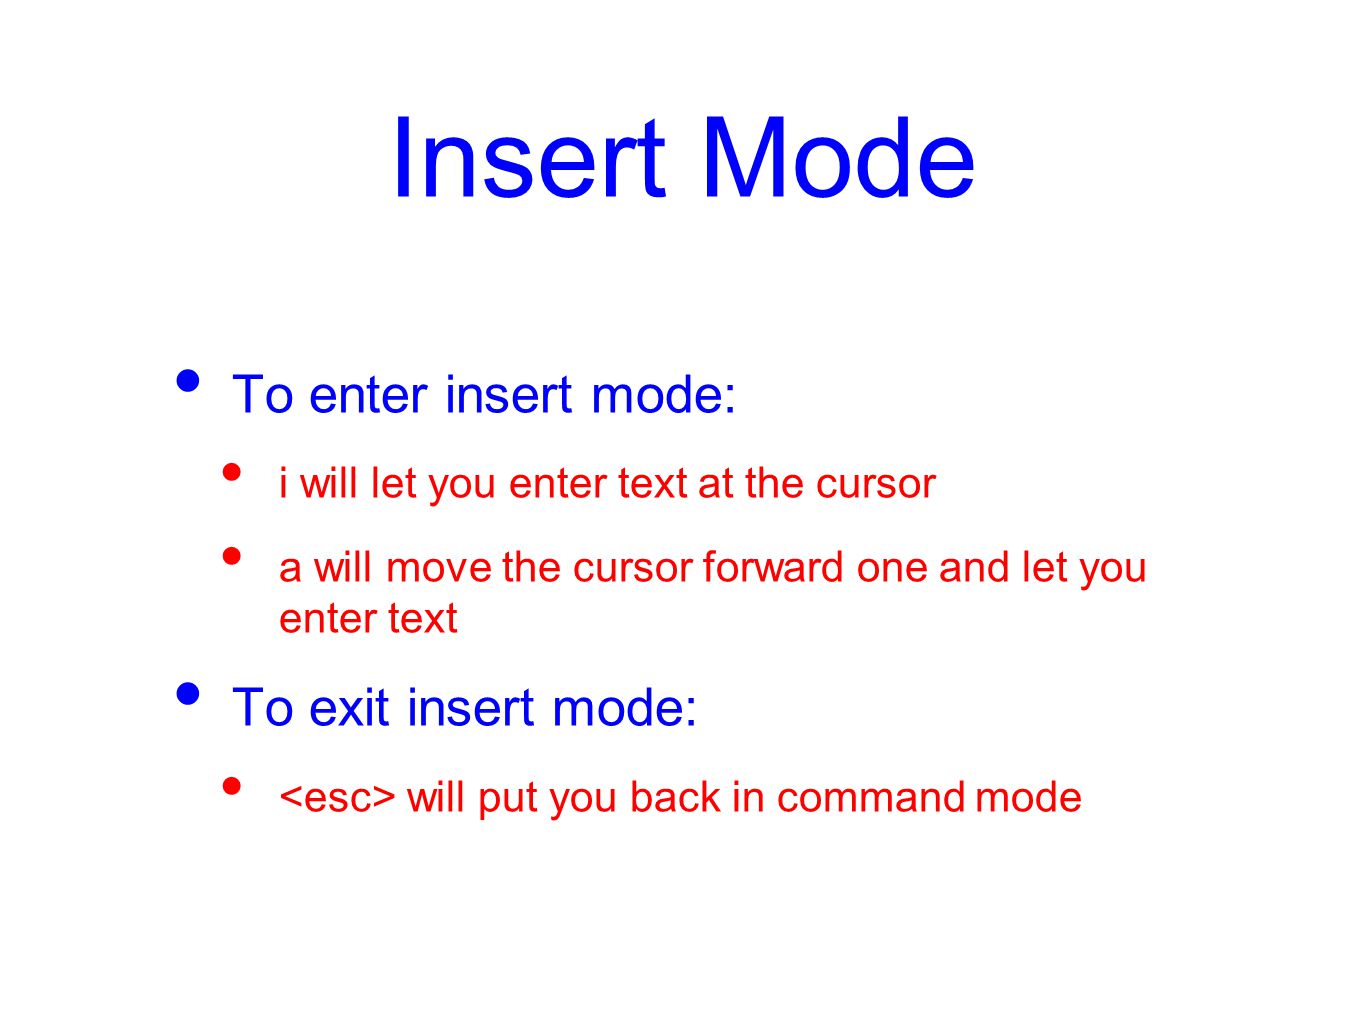 Insert Mode To enter insert mode: i will let you enter text at the cursor a will move the cursor forward one and let you enter text To exit insert mode: will put you back in command mode